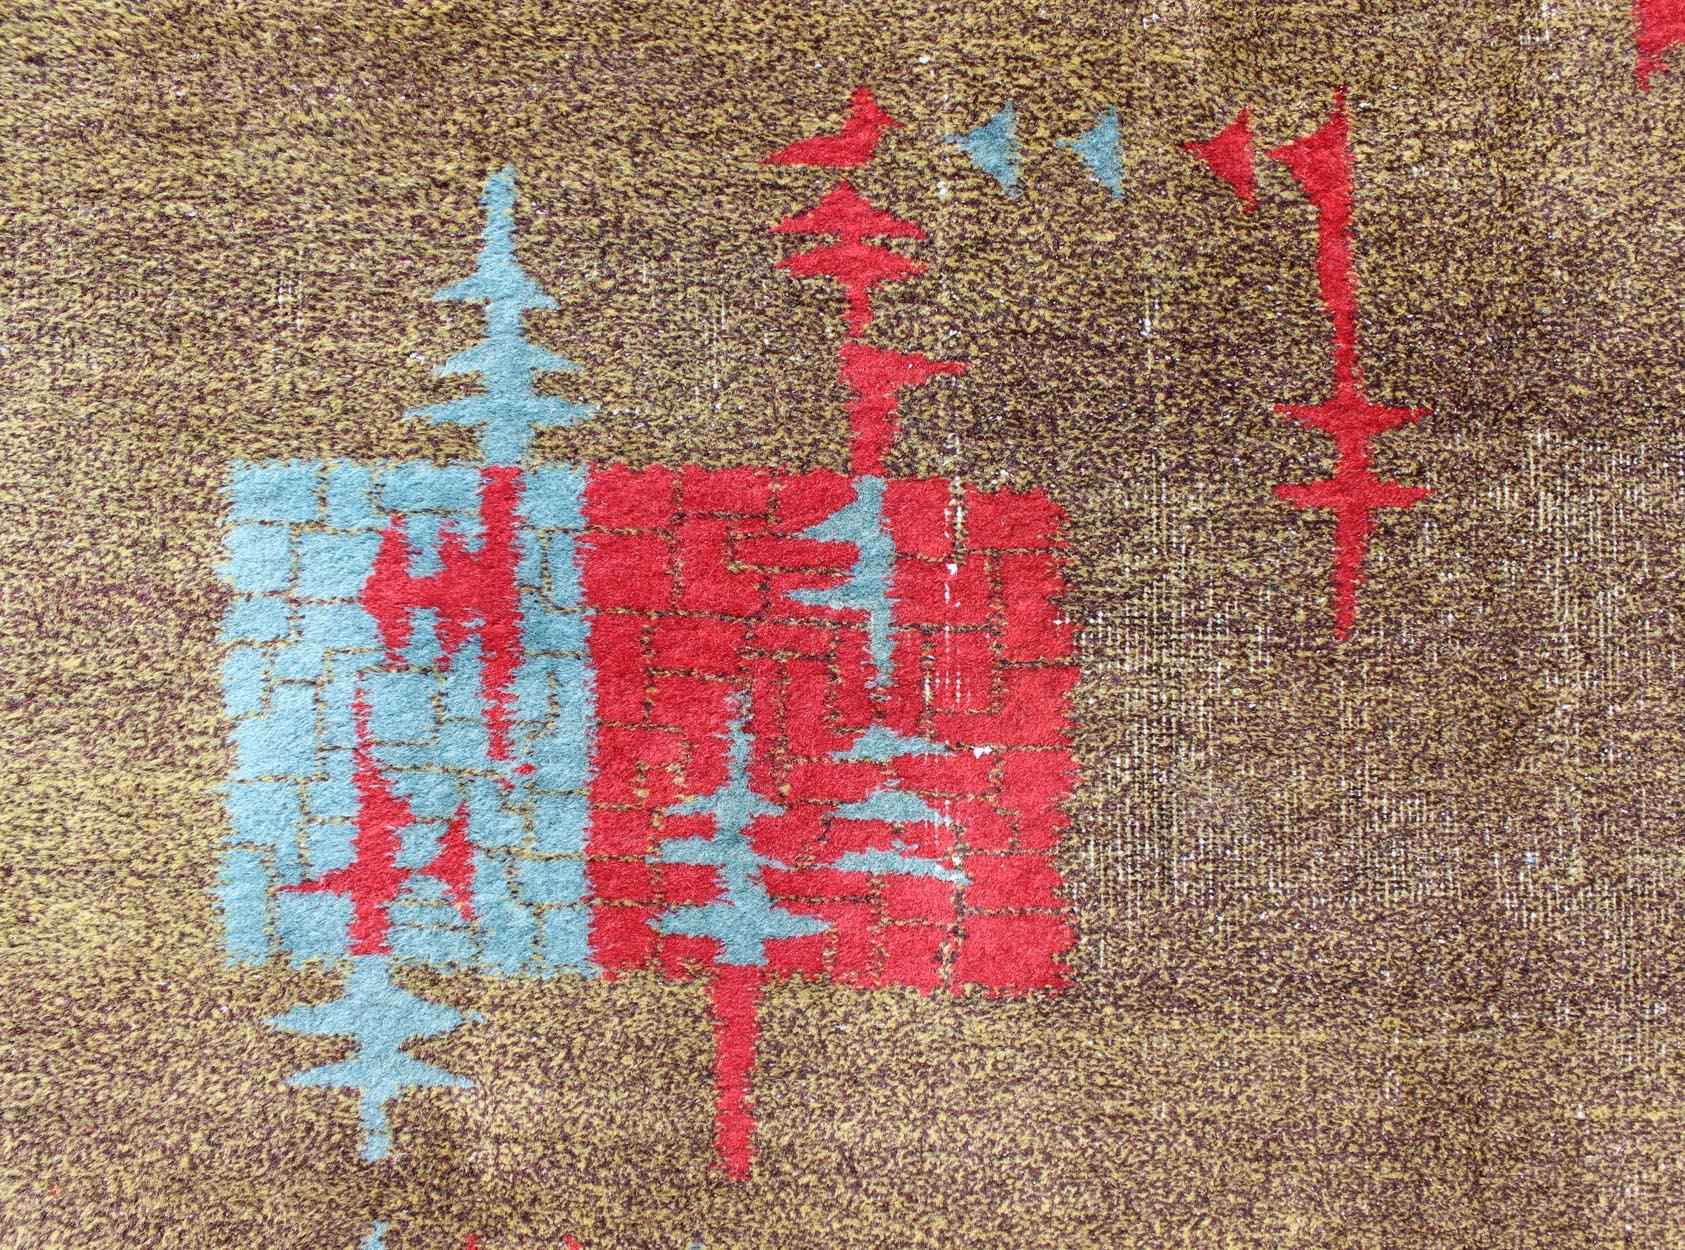 Mid-Century Modern Turkish Rug with Teal-Blue and Red Geometric Shapes  In Excellent Condition For Sale In Atlanta, GA